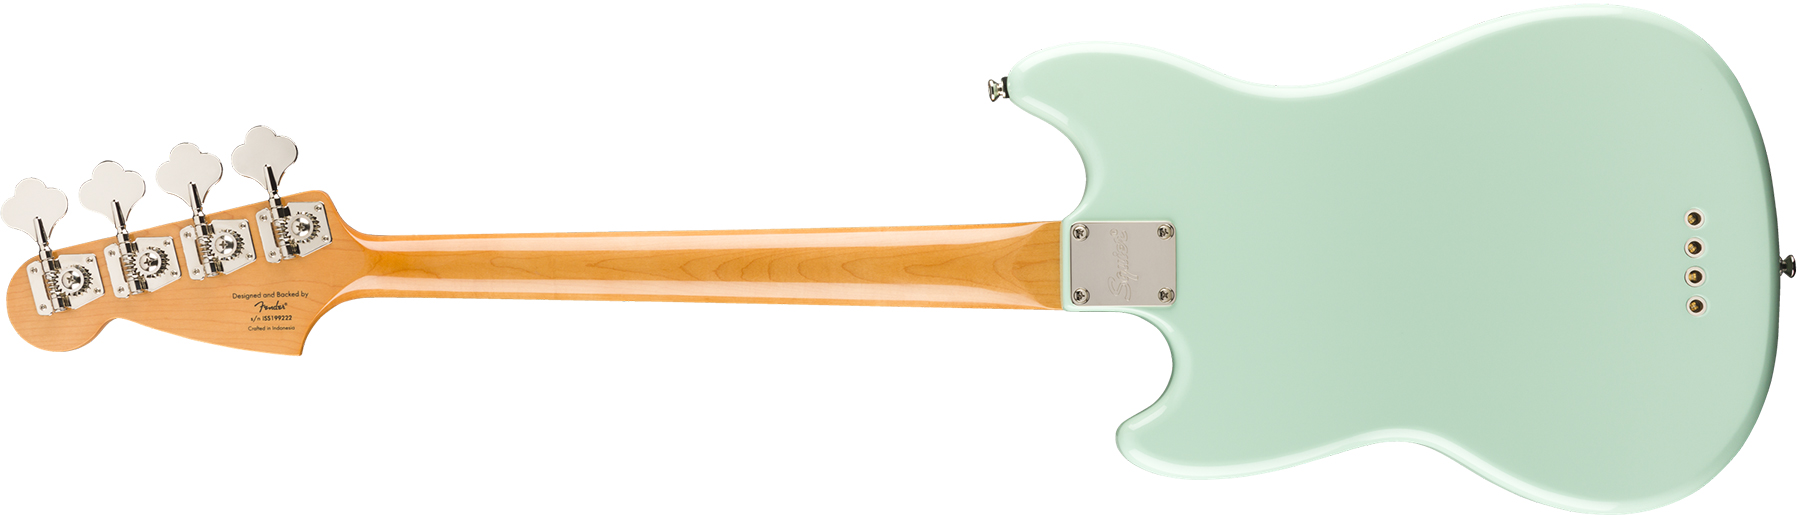 Squier Mustang Bass '60s Classic Vibe Lau 2019 - Seafoam Green - Solid body electric bass - Variation 1